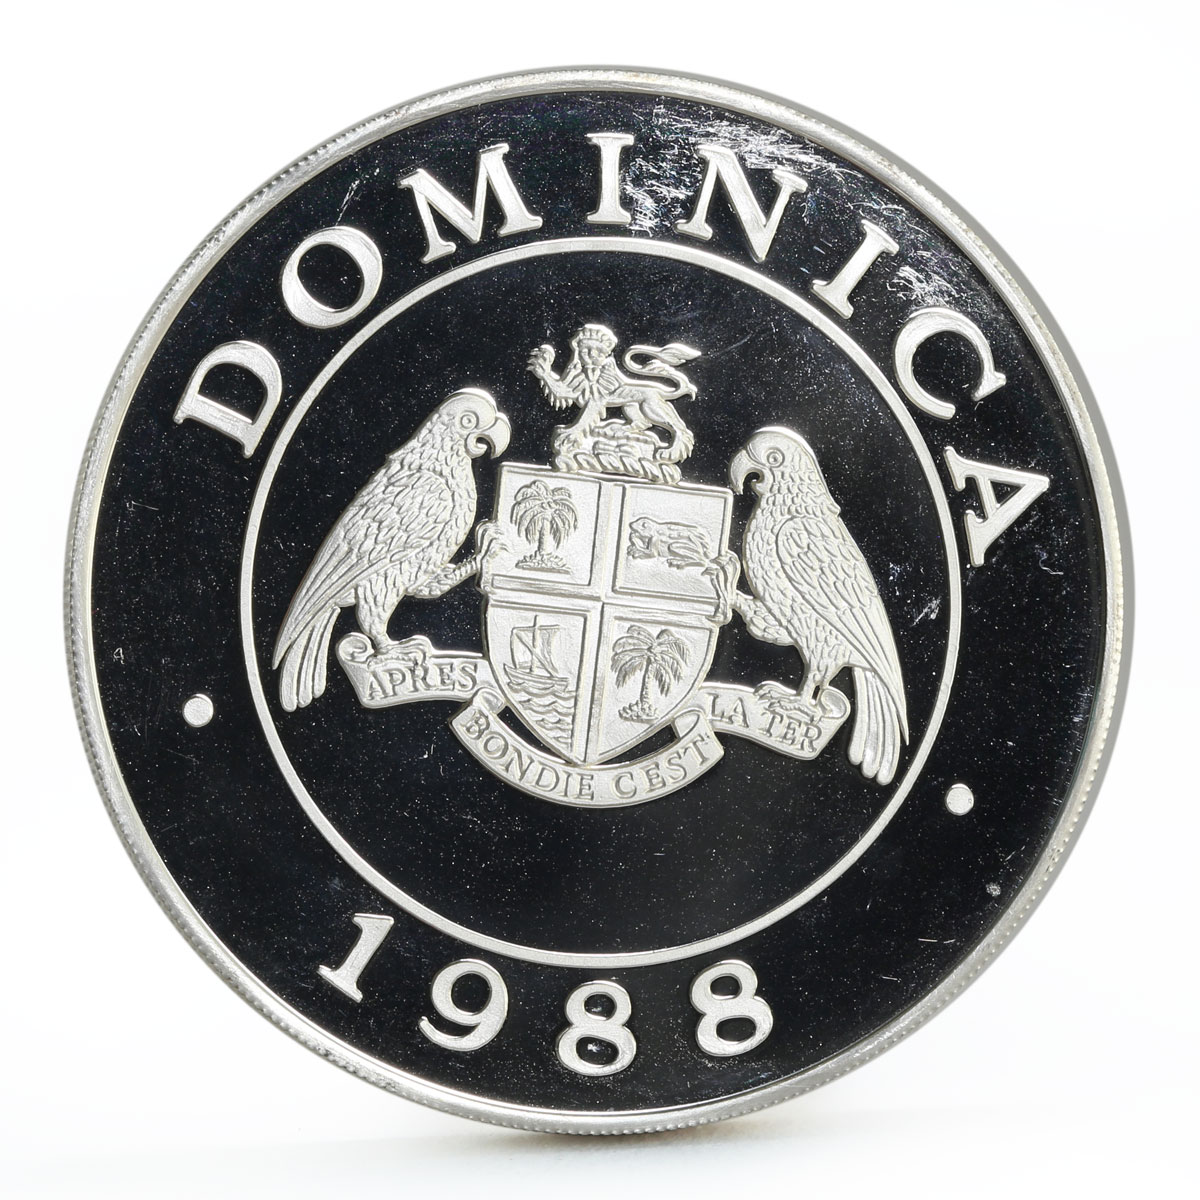 Dominican Republic 100 dollars Local Fauna series Parrots proof silver coin 1988